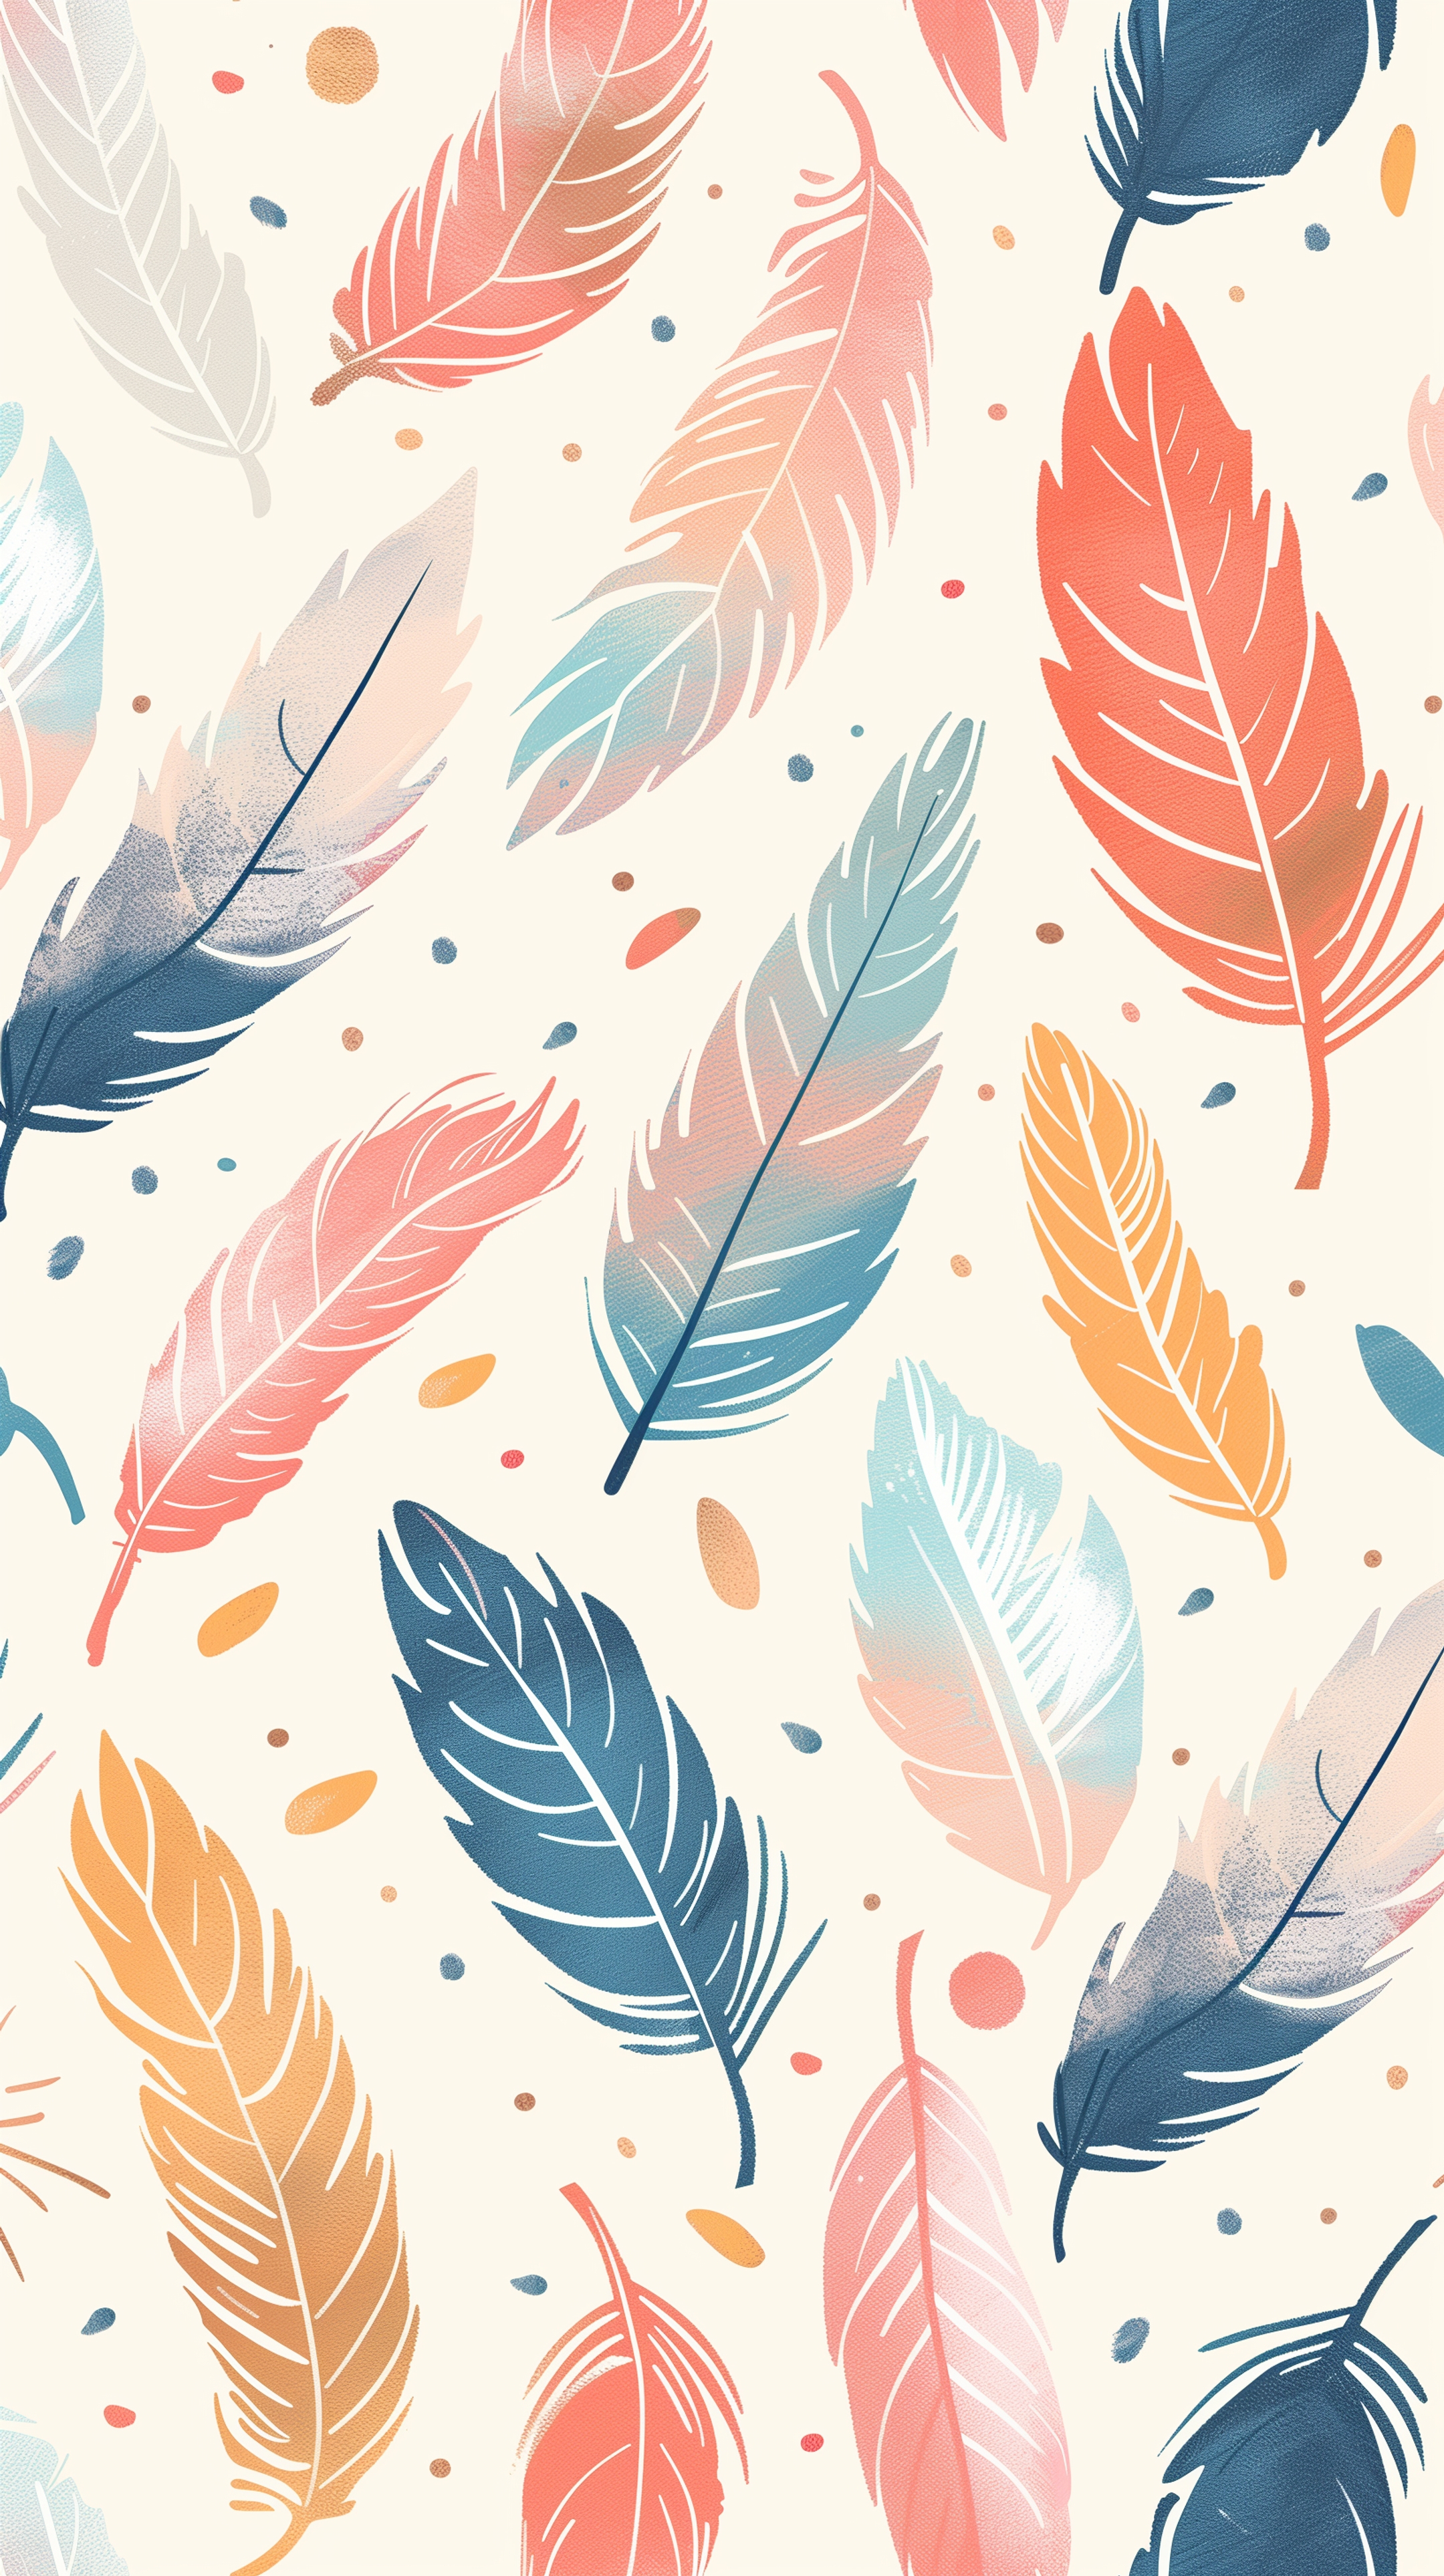 Colorful Feathers Design for Kids 牆紙[385f1366577146a2b959]